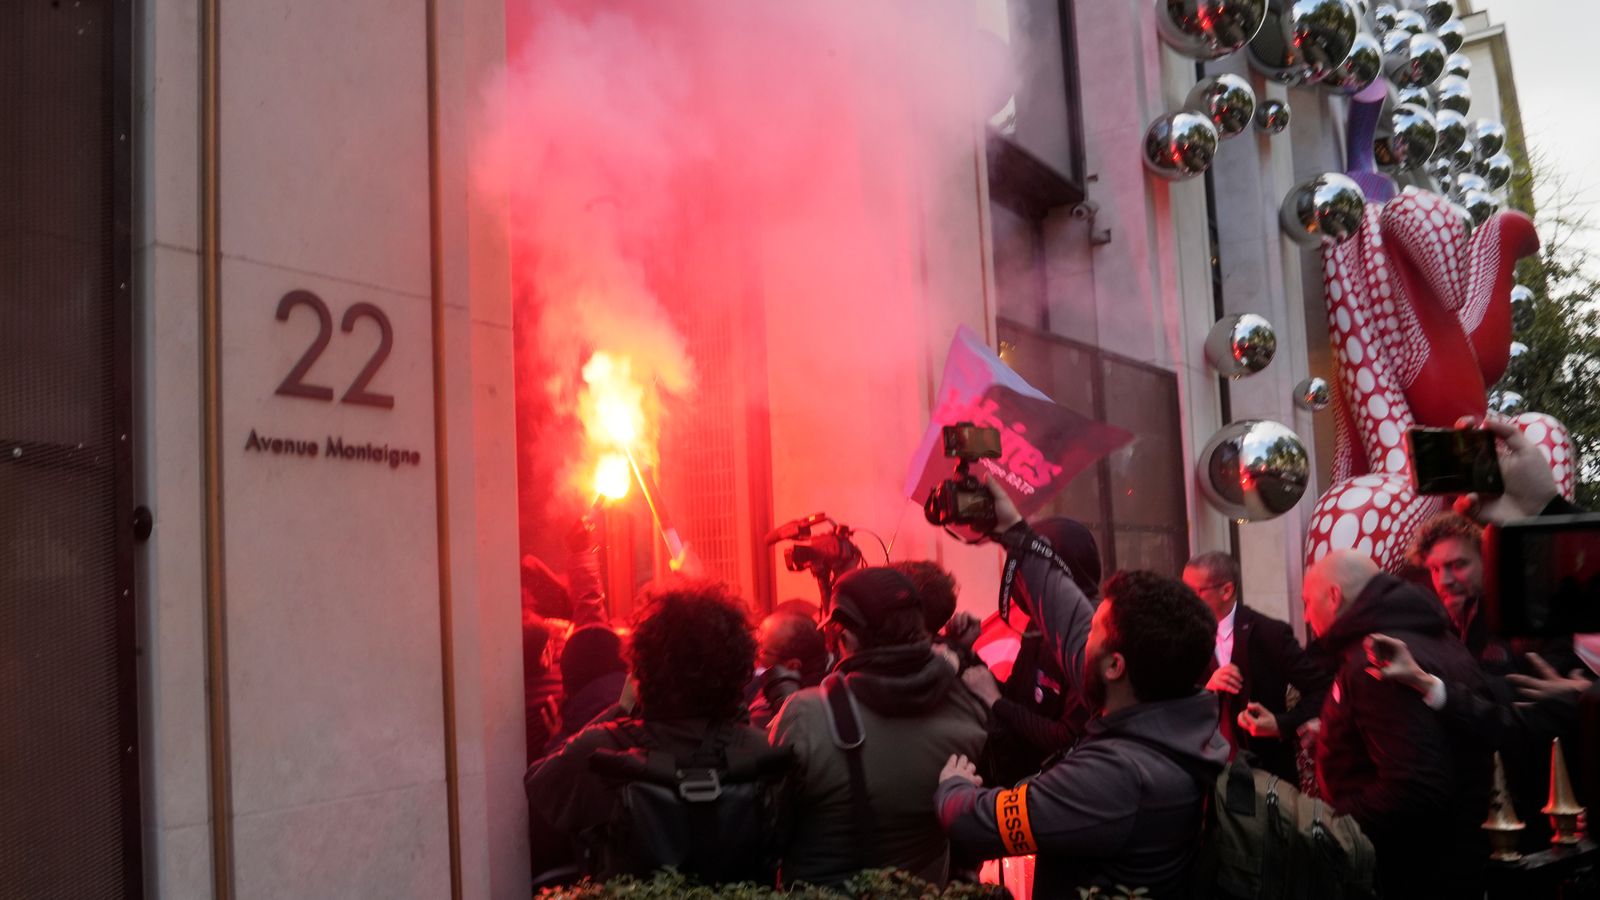 Railway workers invade Louis Vuitton HQ as protests erupt across